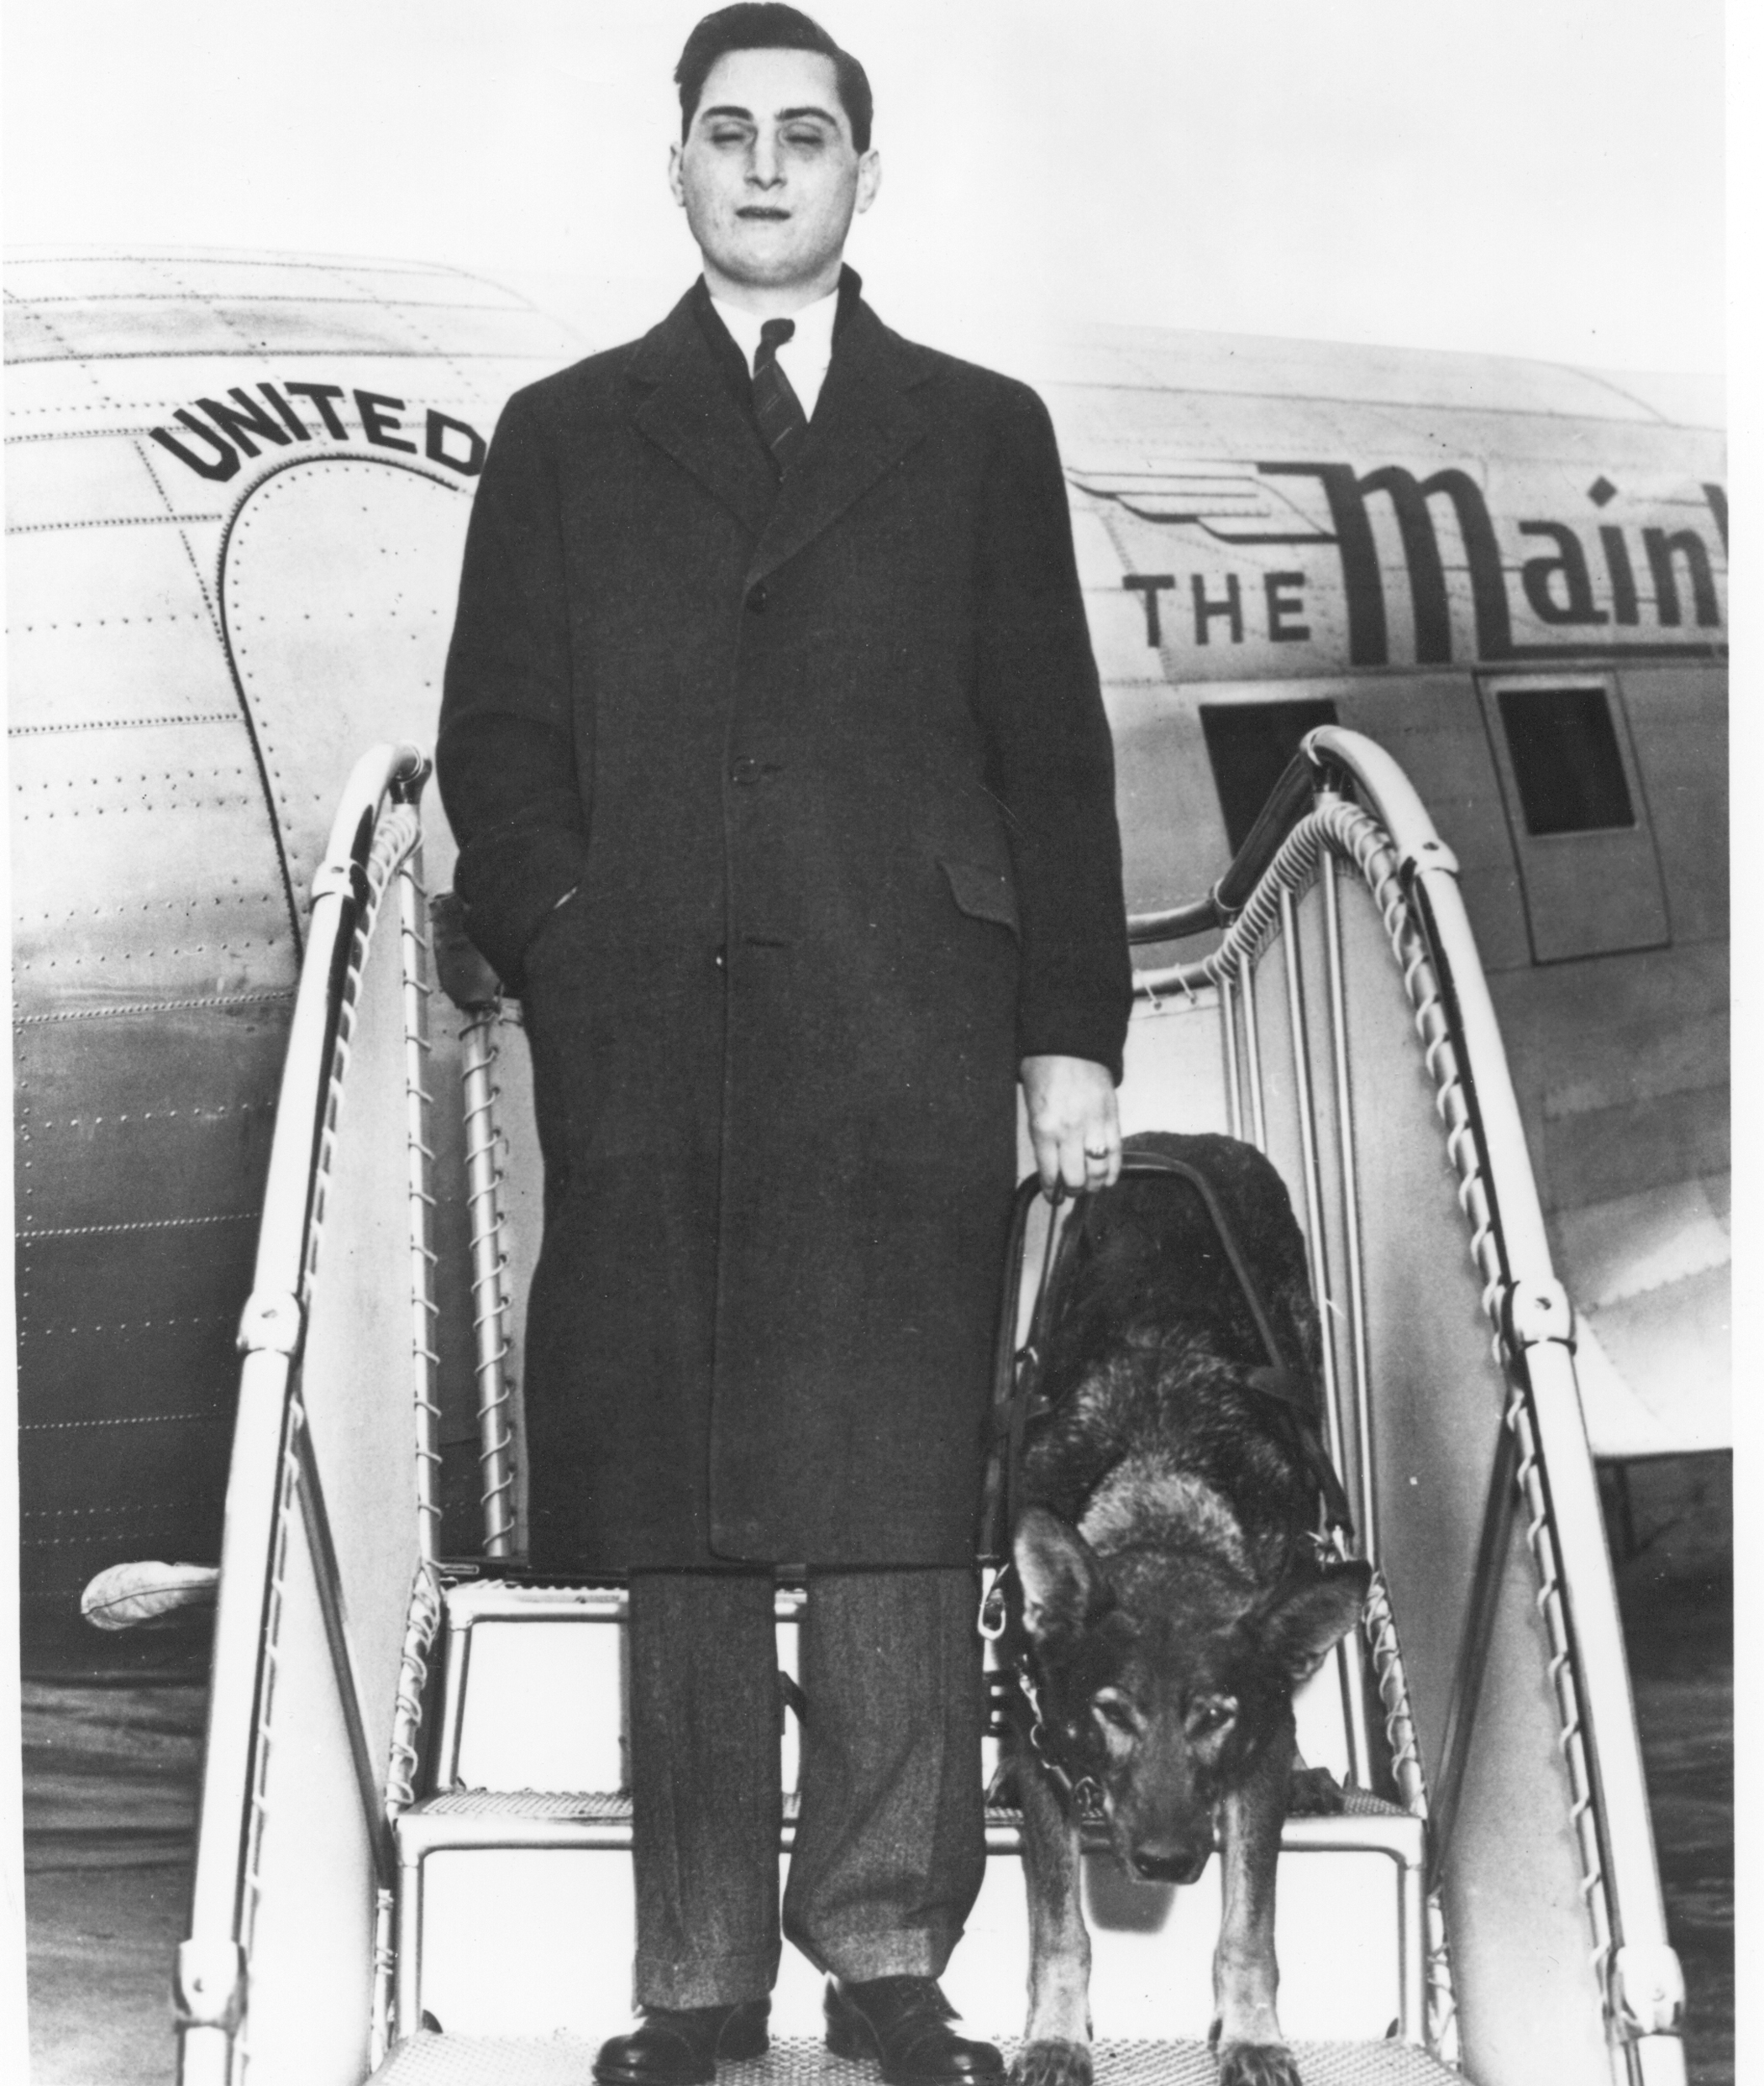 Morris Frank, guided by Buddy, exits a plane.